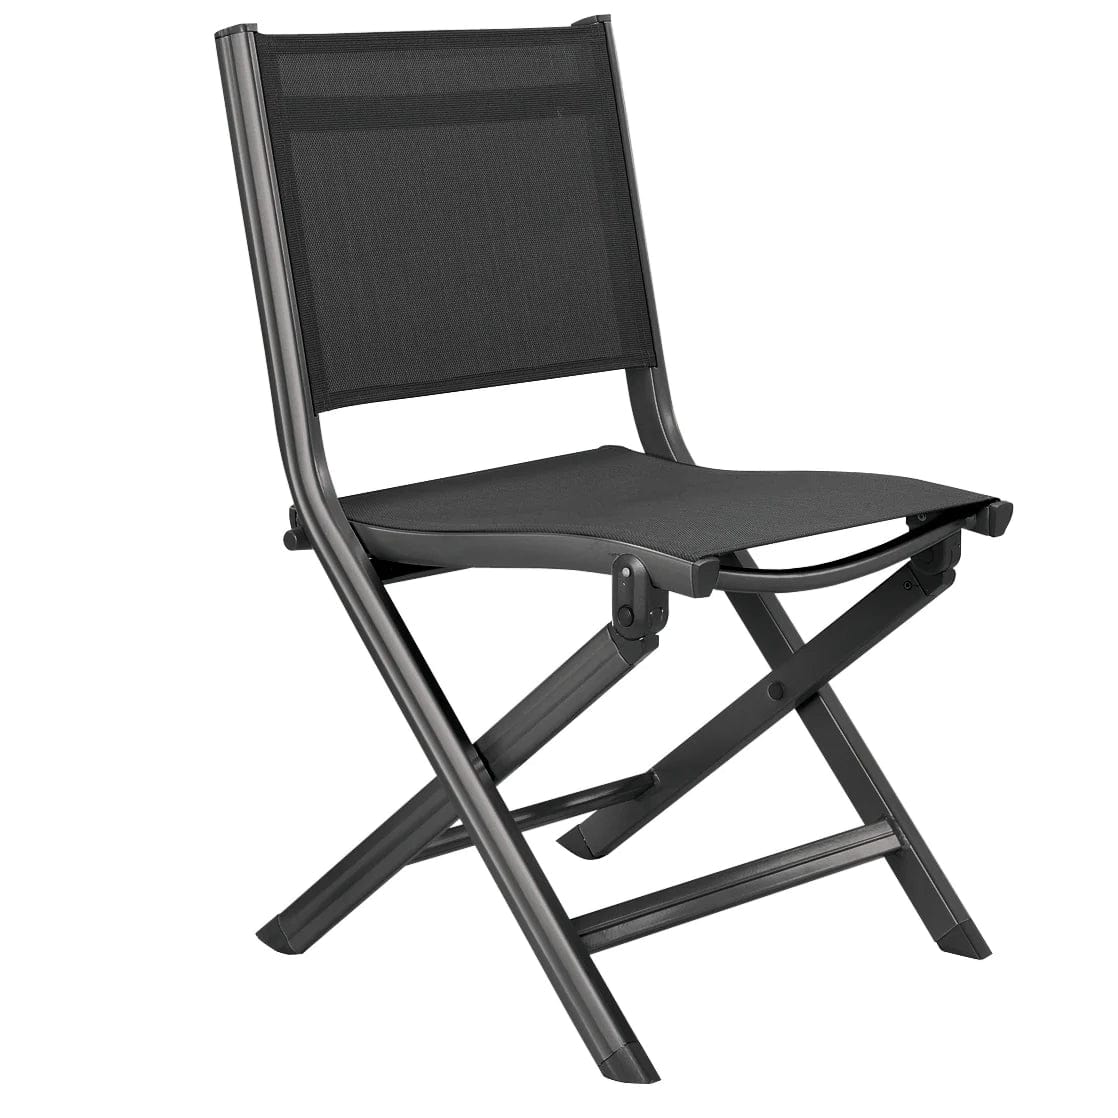 Outdoor High Quality Folding Chair 